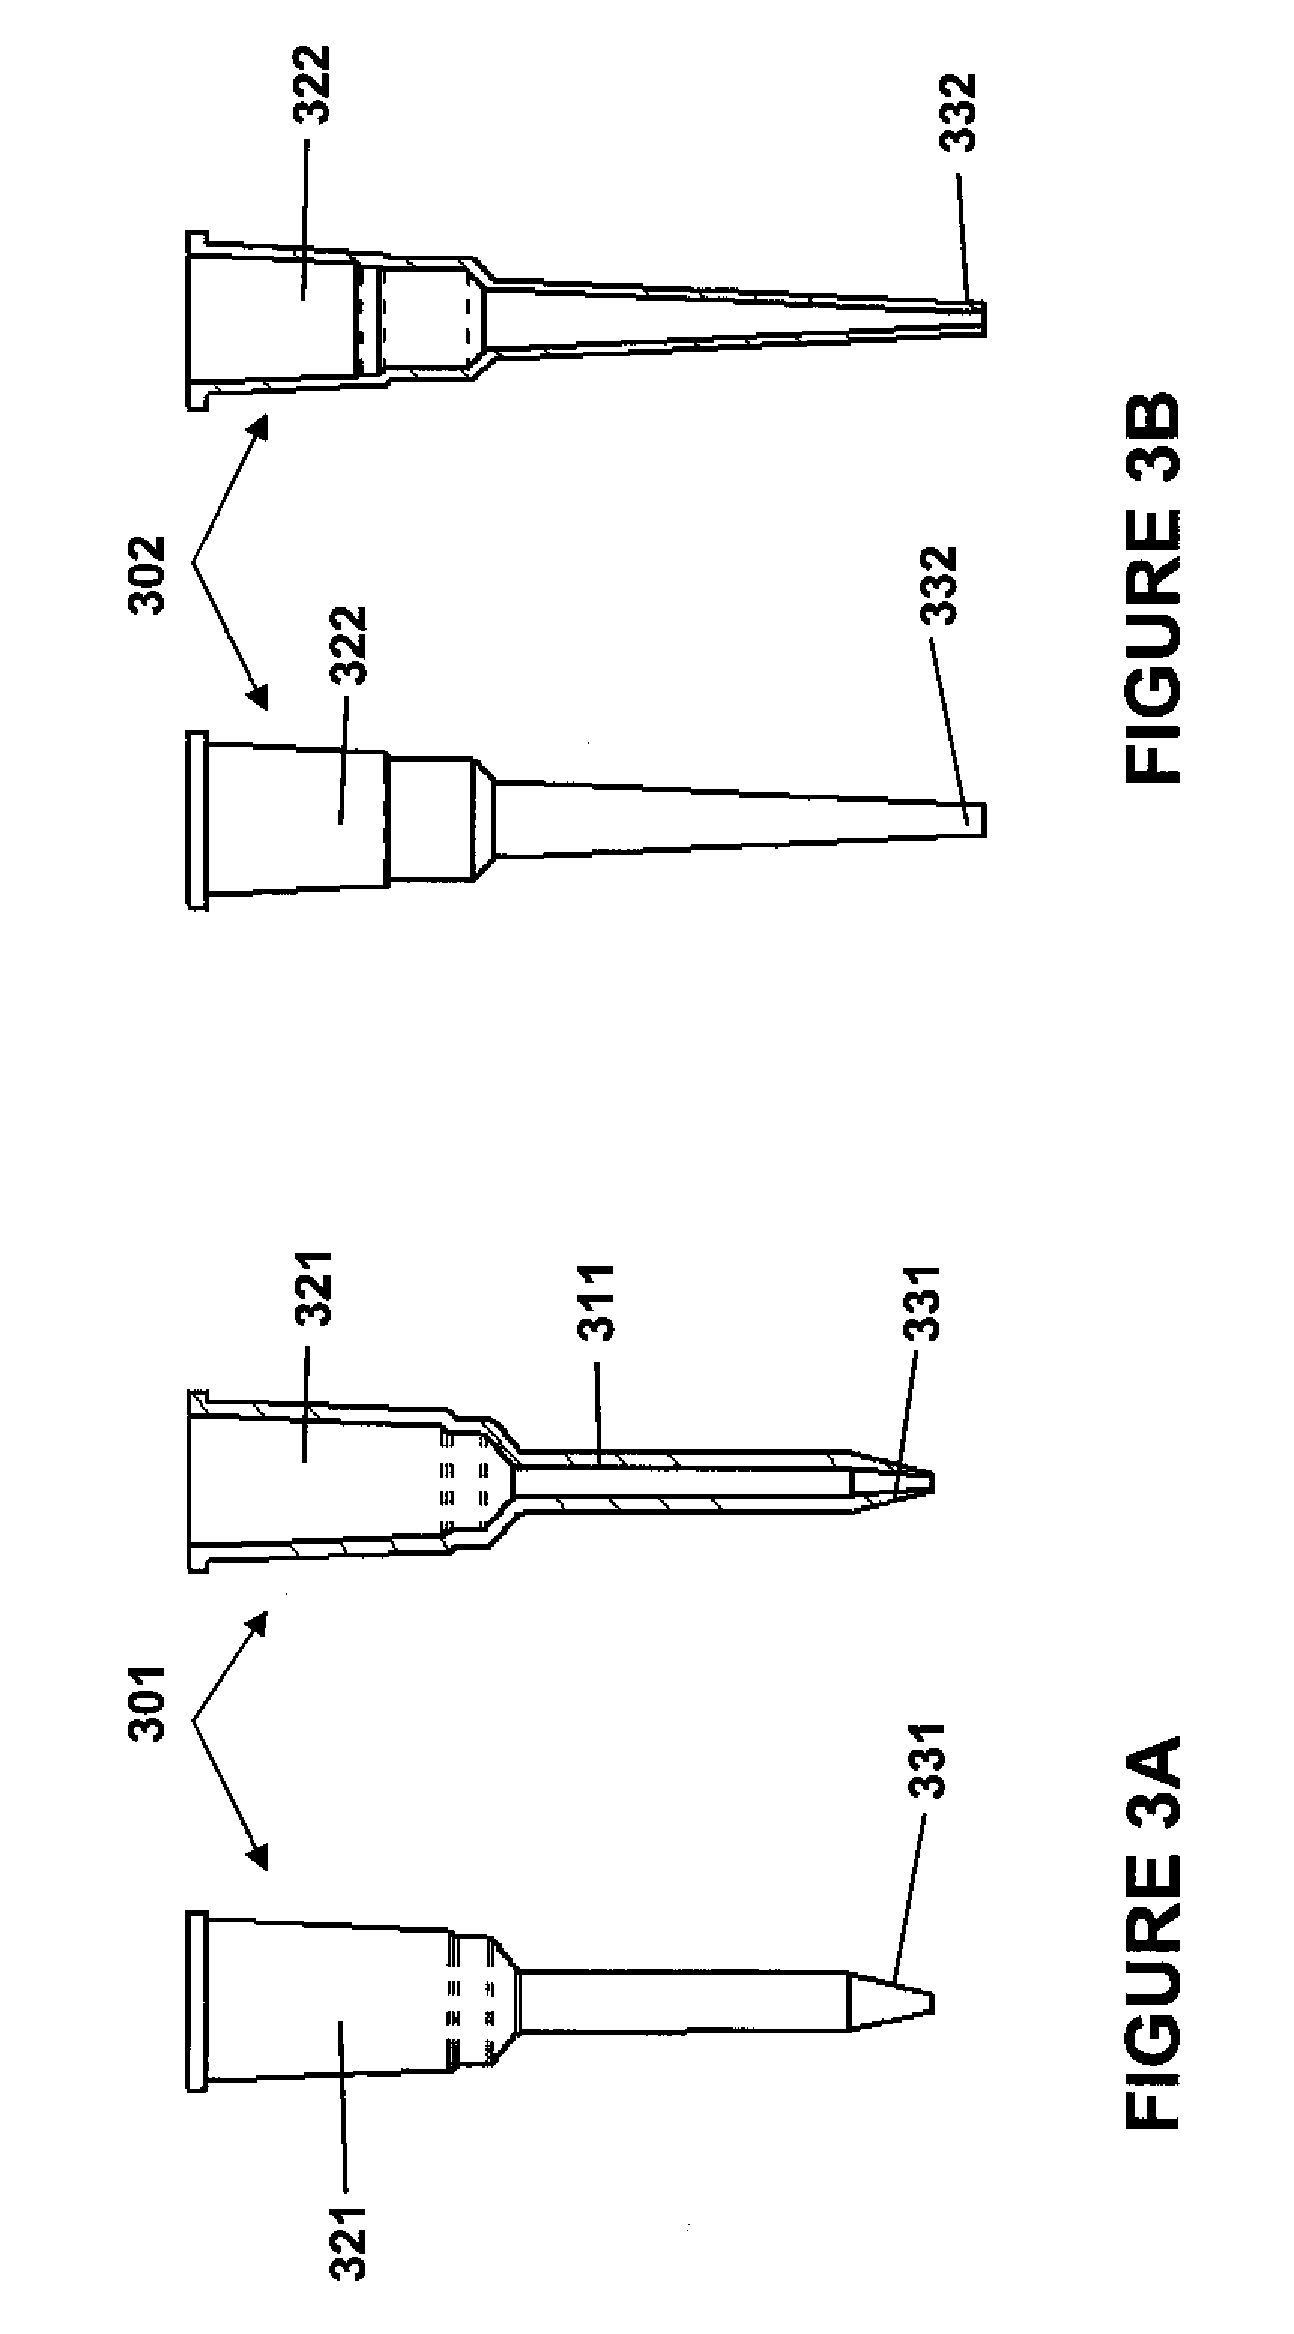 Modular point-of-care devices, systems, and uses thereof